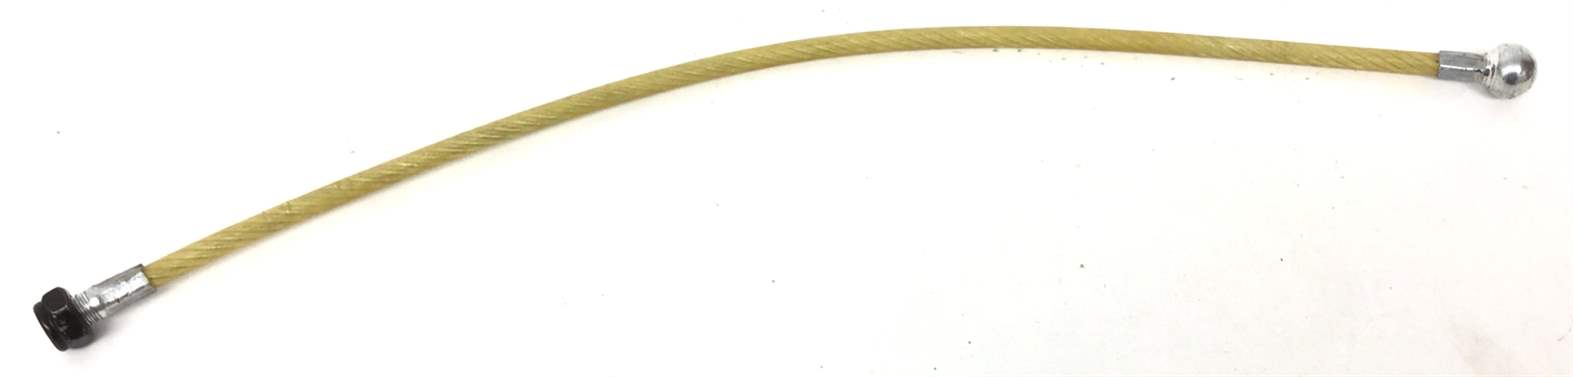 Frame Cable (Used)